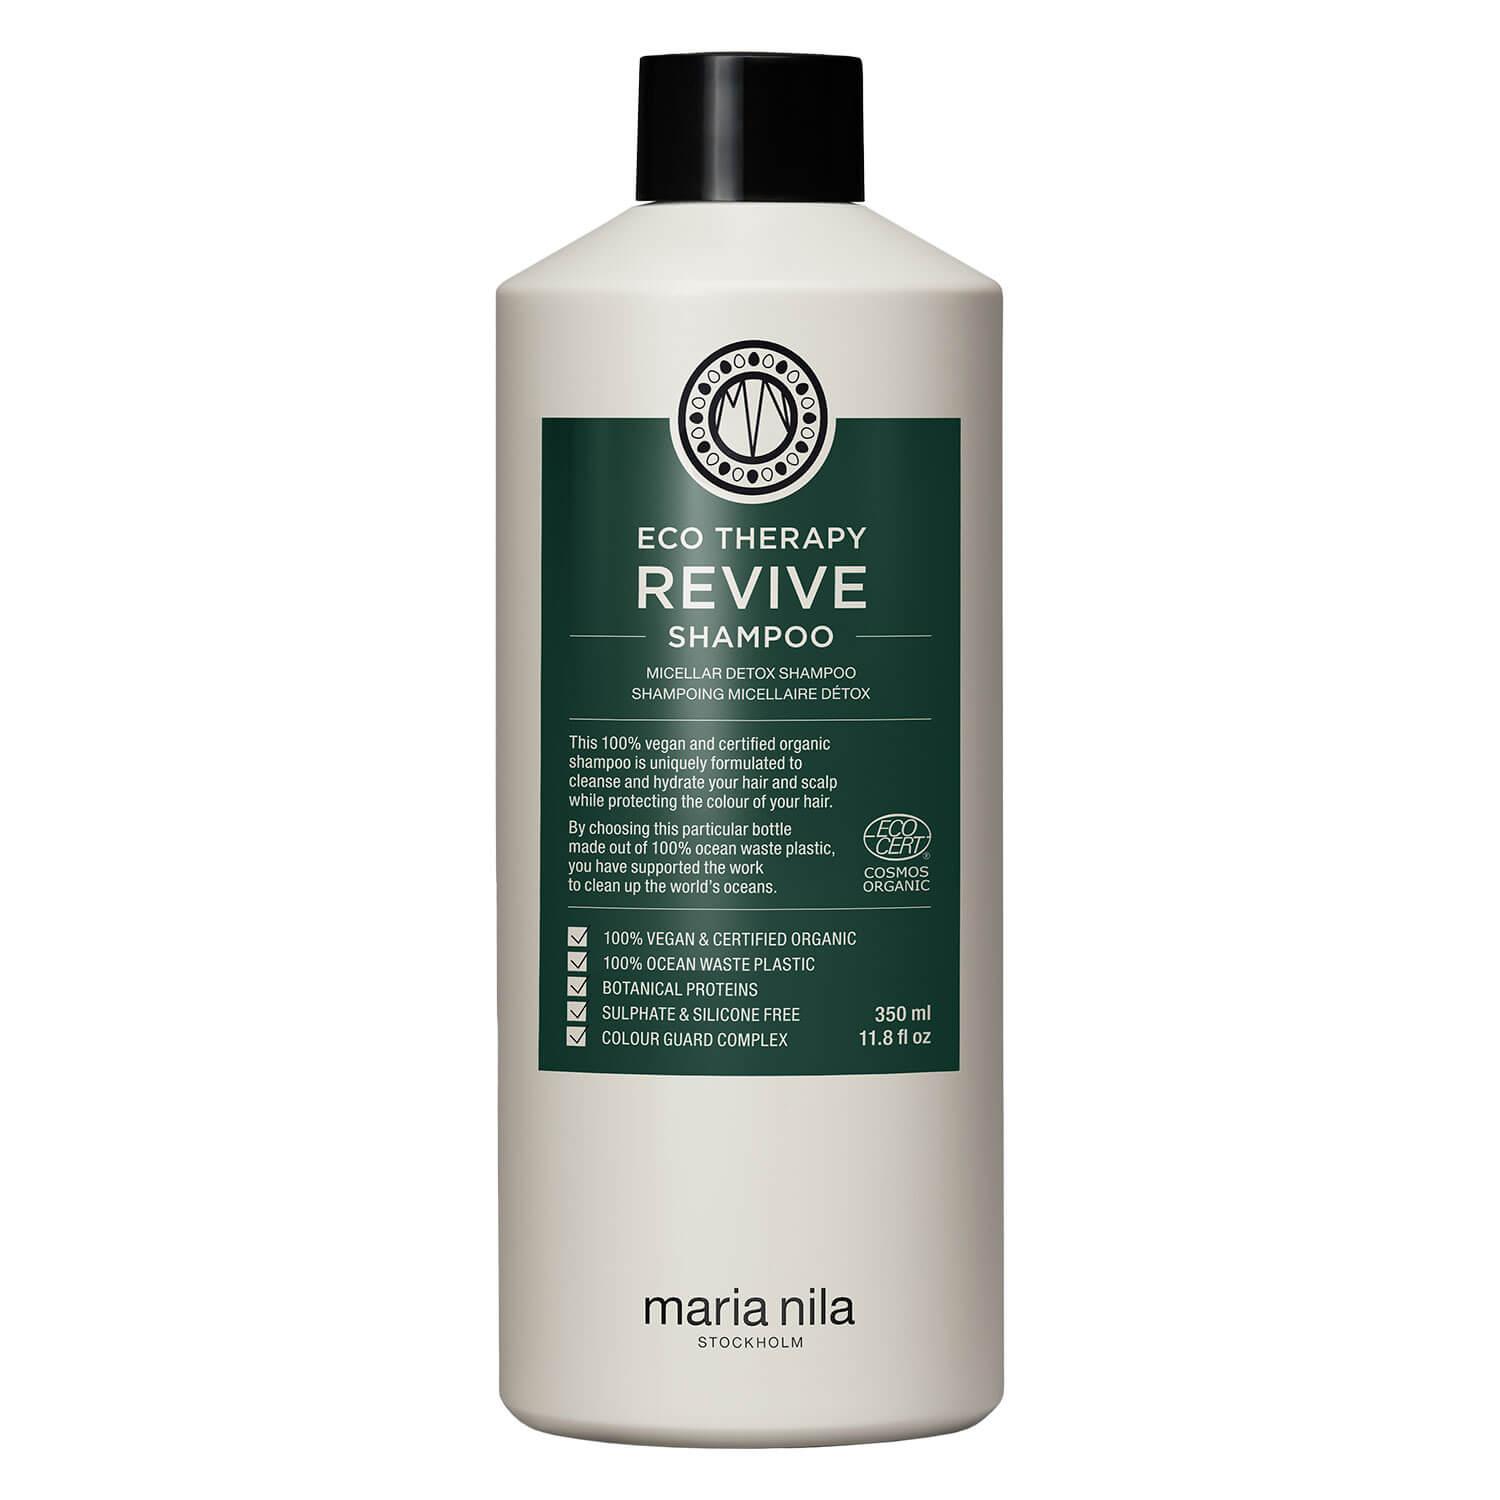 Care & Style - Eco Therapy Revive Shampoo